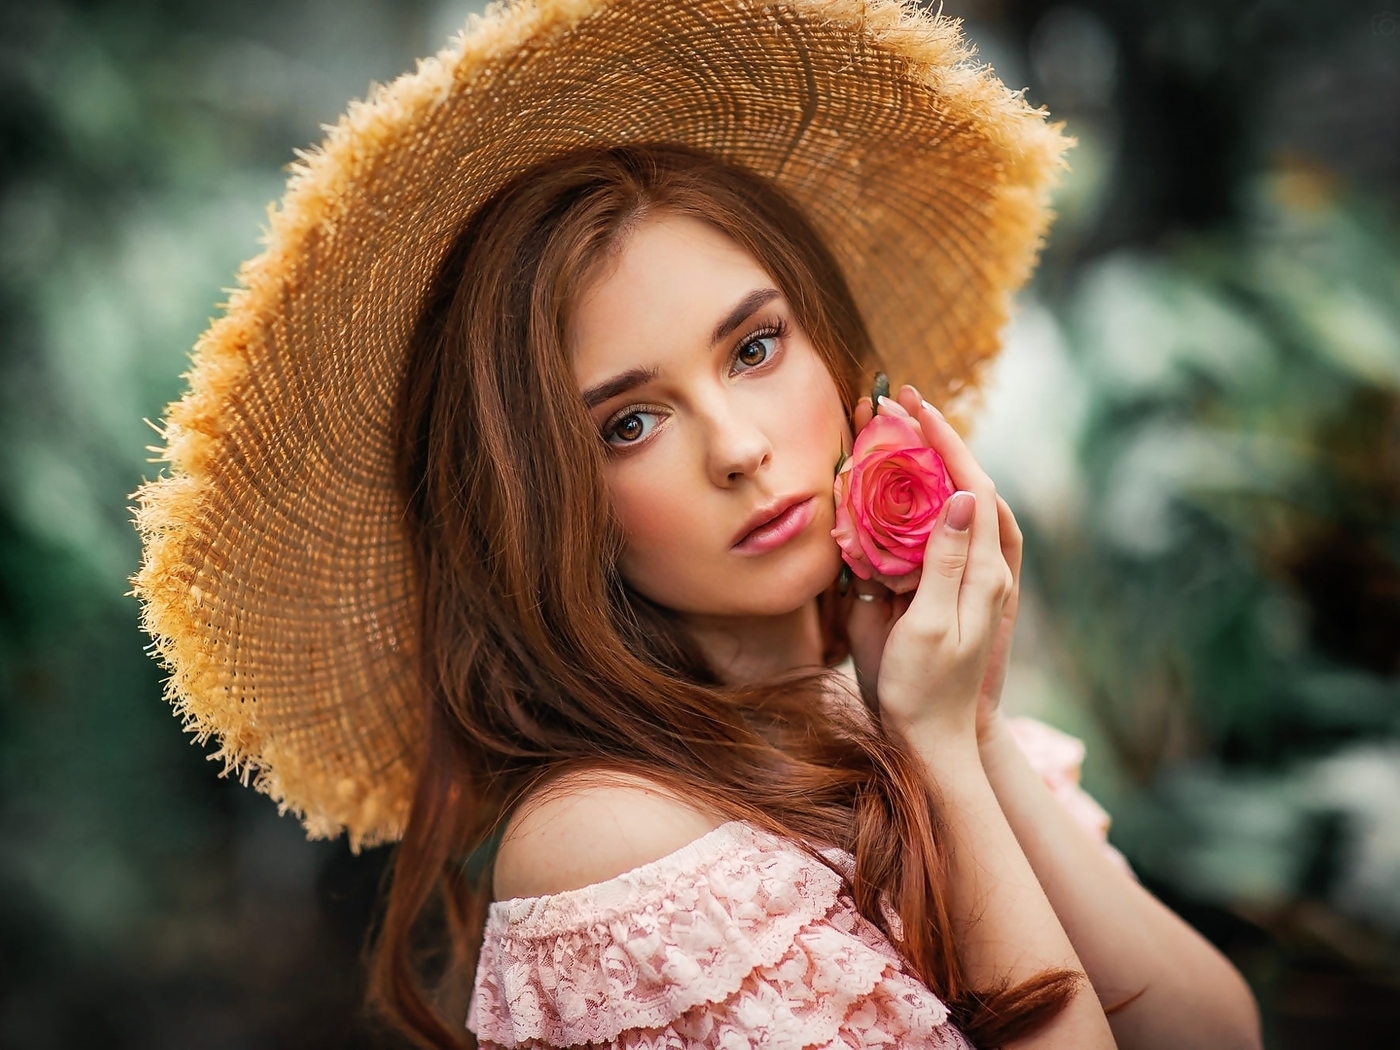 Image: Face, girl, hat, straw, blurred background